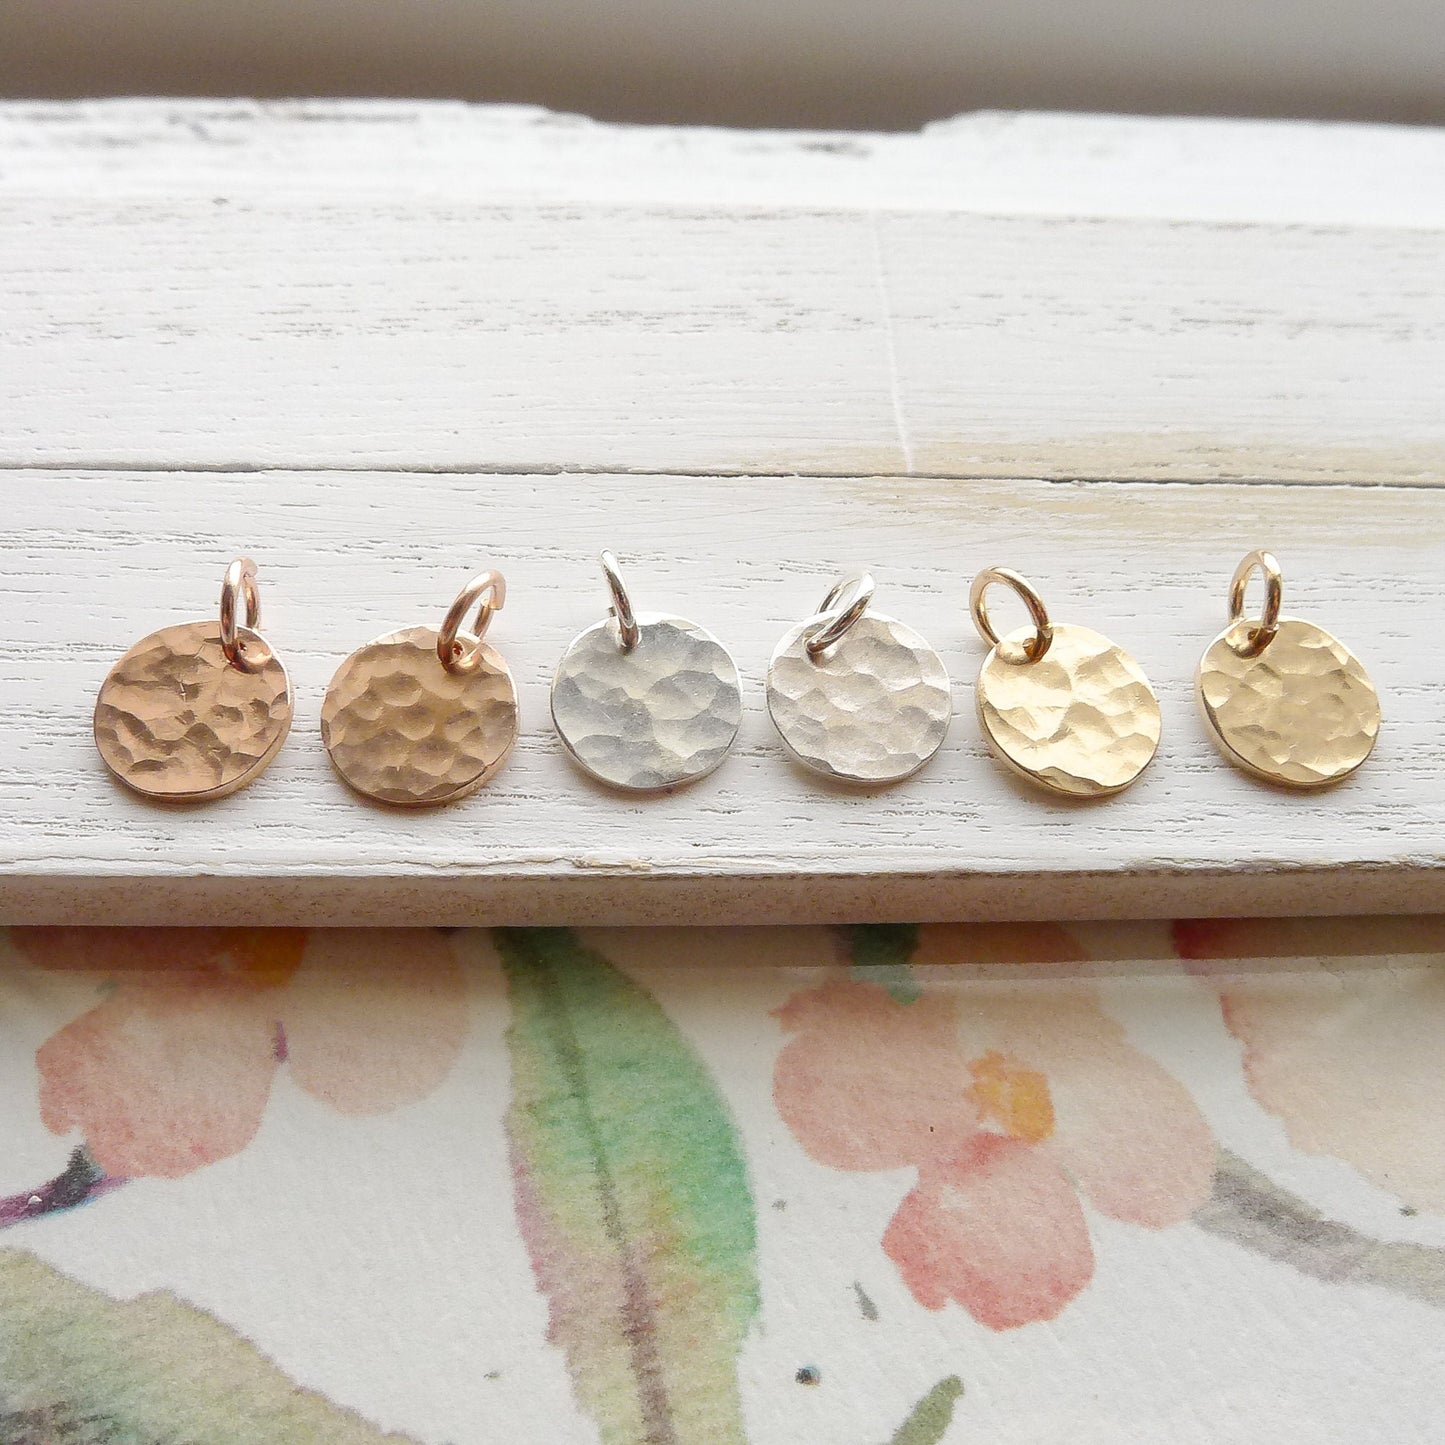 Hammered Disc Charms Pounded Metal Circle Pendants Sterling Rose Gold Filled Jewelry Component For Earrings or Necklaces